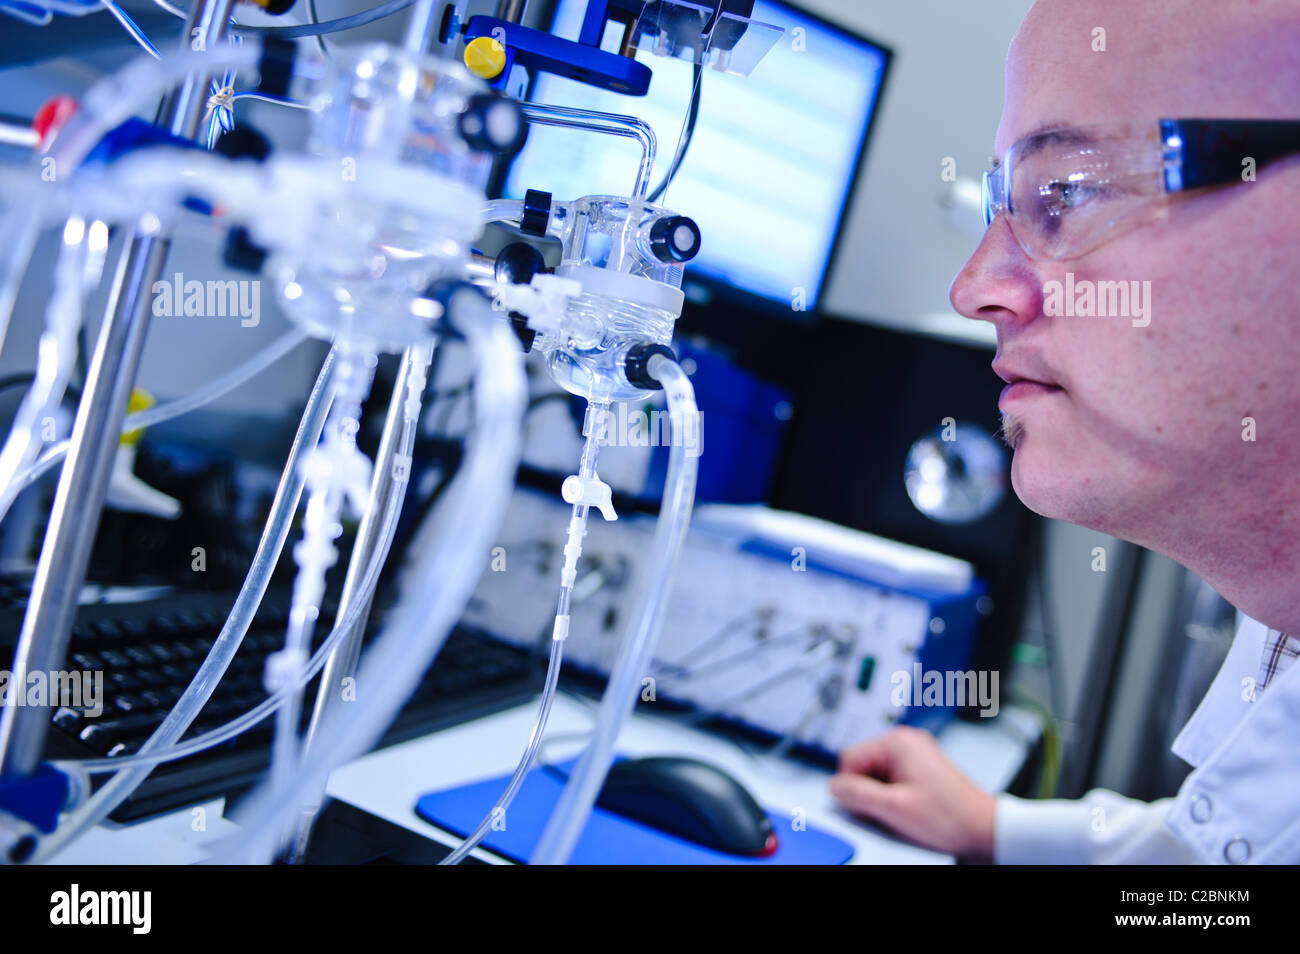 Male scientist wearing goggles looking at apparatus in science lab Stock Photo